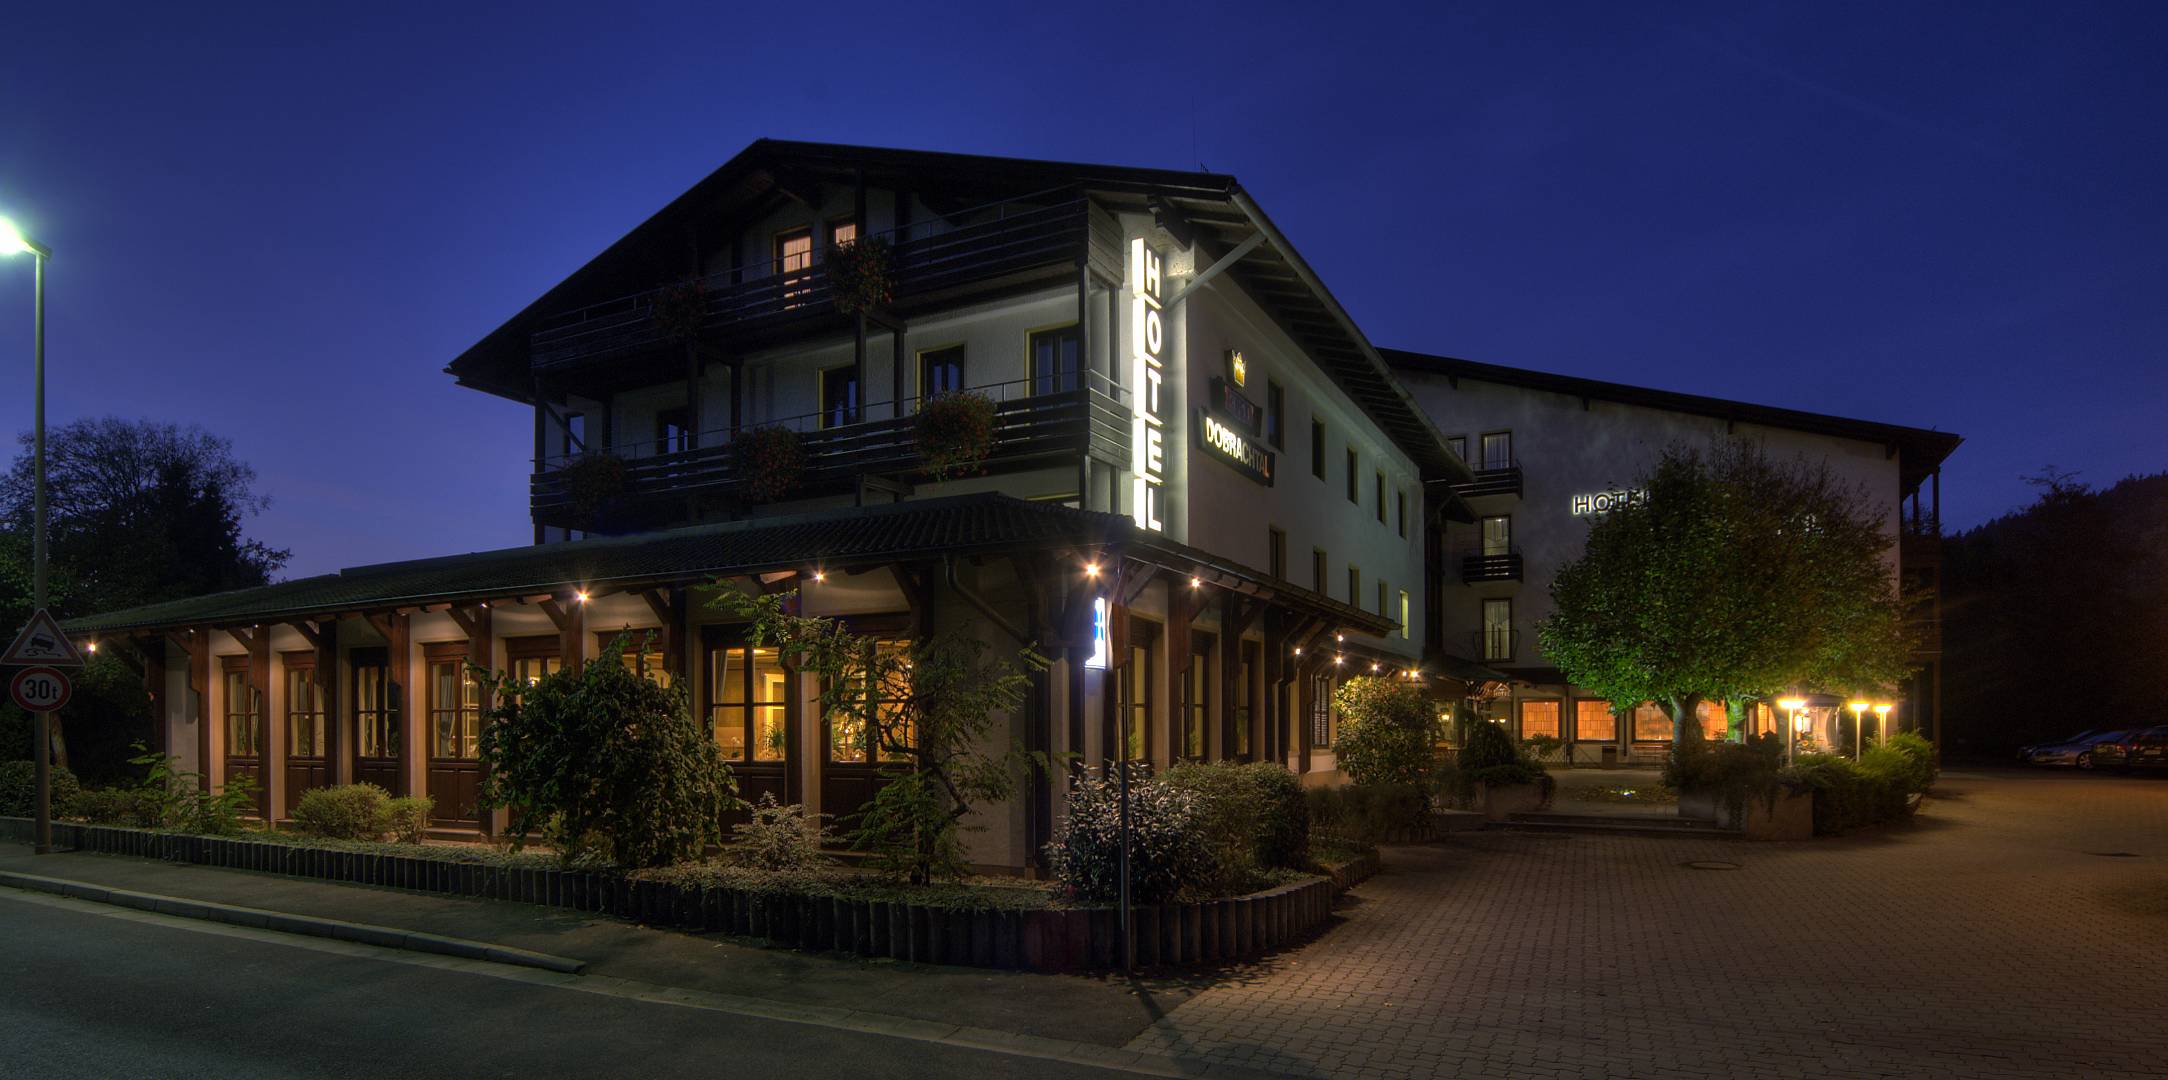 Night shot of the hotel Dobrachtal from the outside